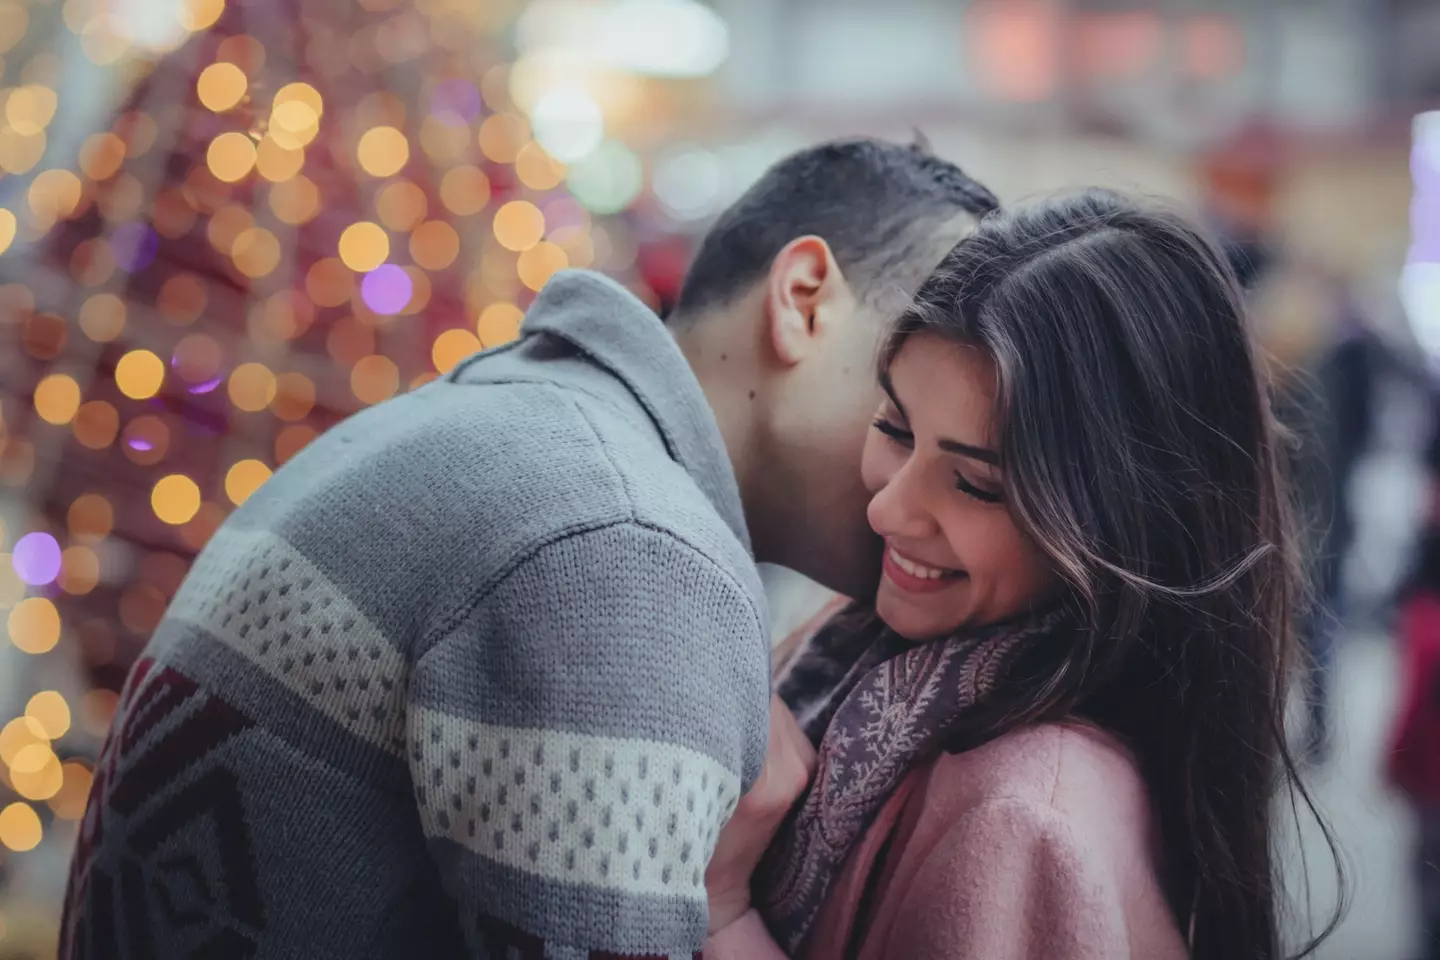 Christmas is a pretty perfect time to go on cute, festive dates.